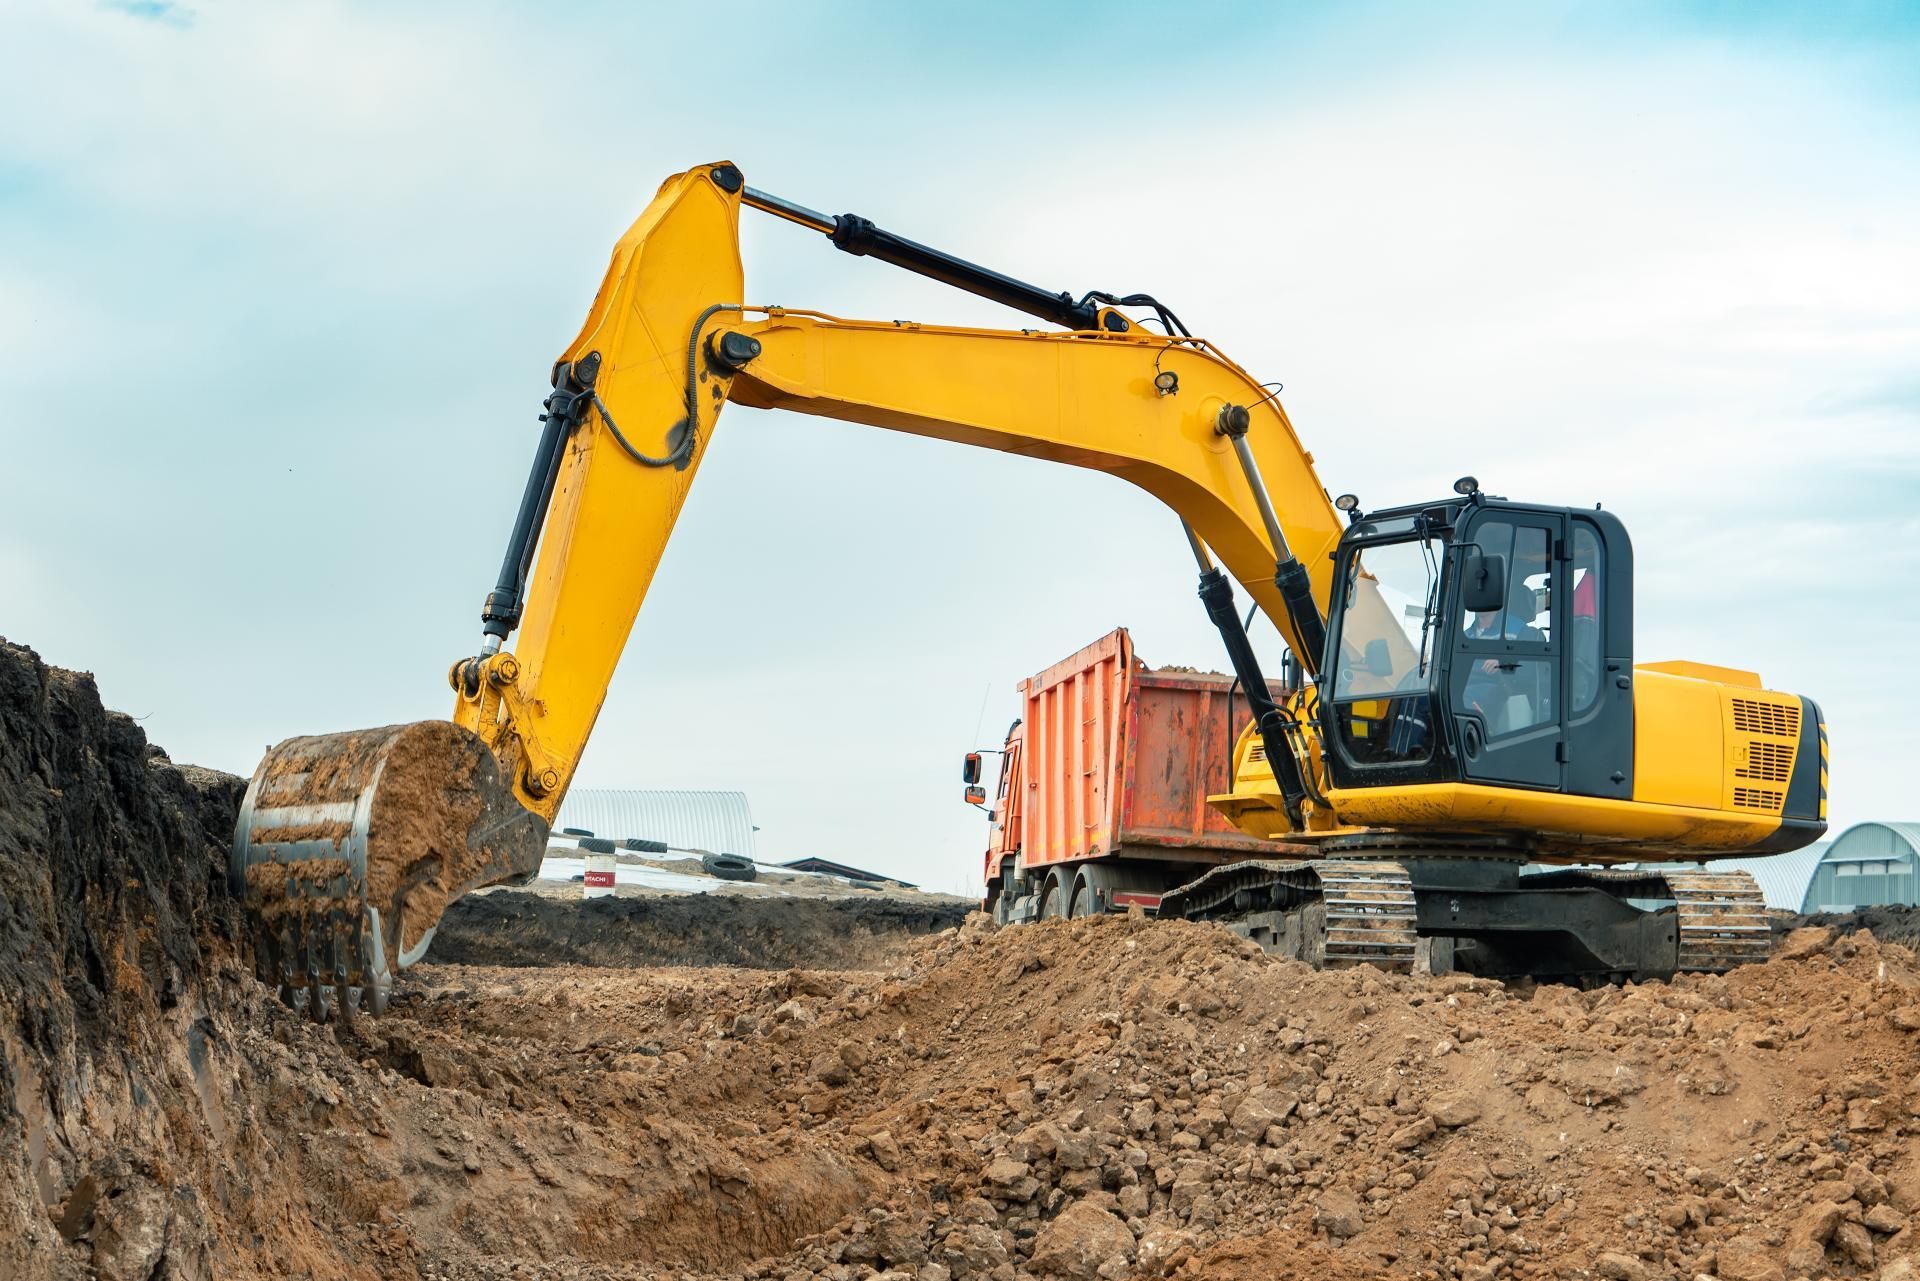 a yellow excavator is loading dirt into a dump truck